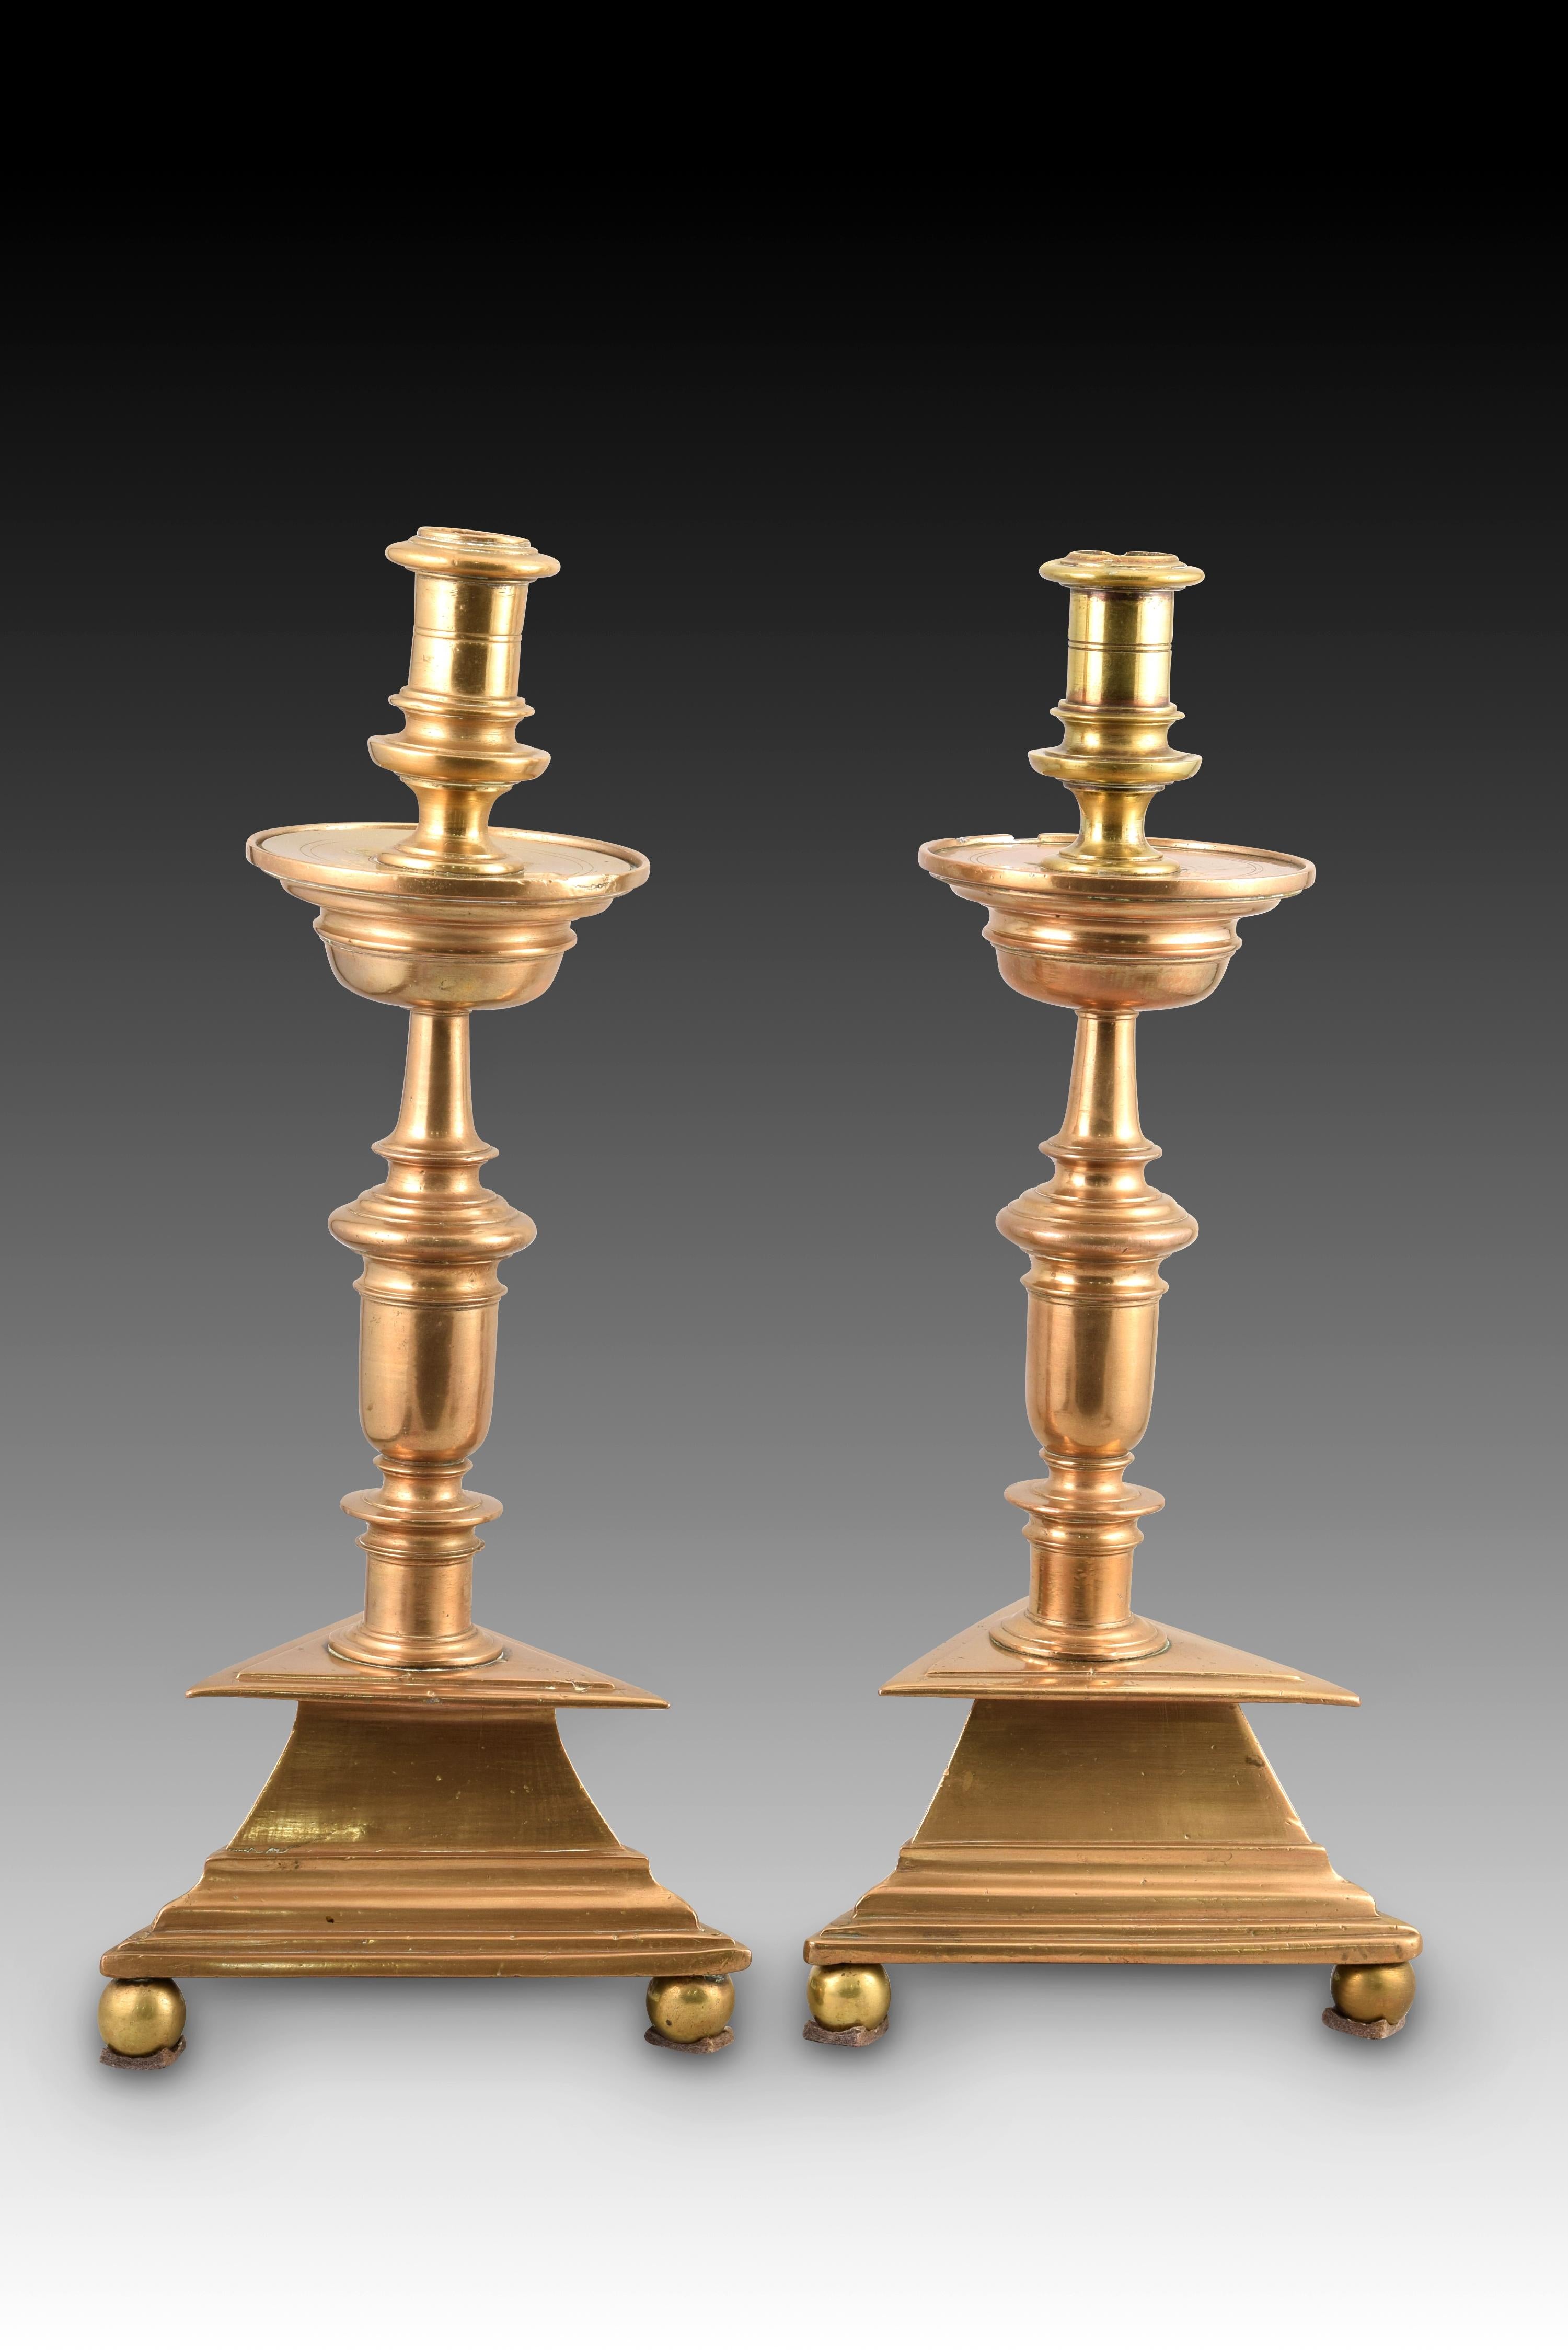 Pair of candlesticks. Bronze. XVII century and later.
Replaced stem. 
Pair of bronze candlesticks raised on three legs, with triangular bases and enhanced with ready moldings, turned stems with architectural profiles of classicist airs and circular